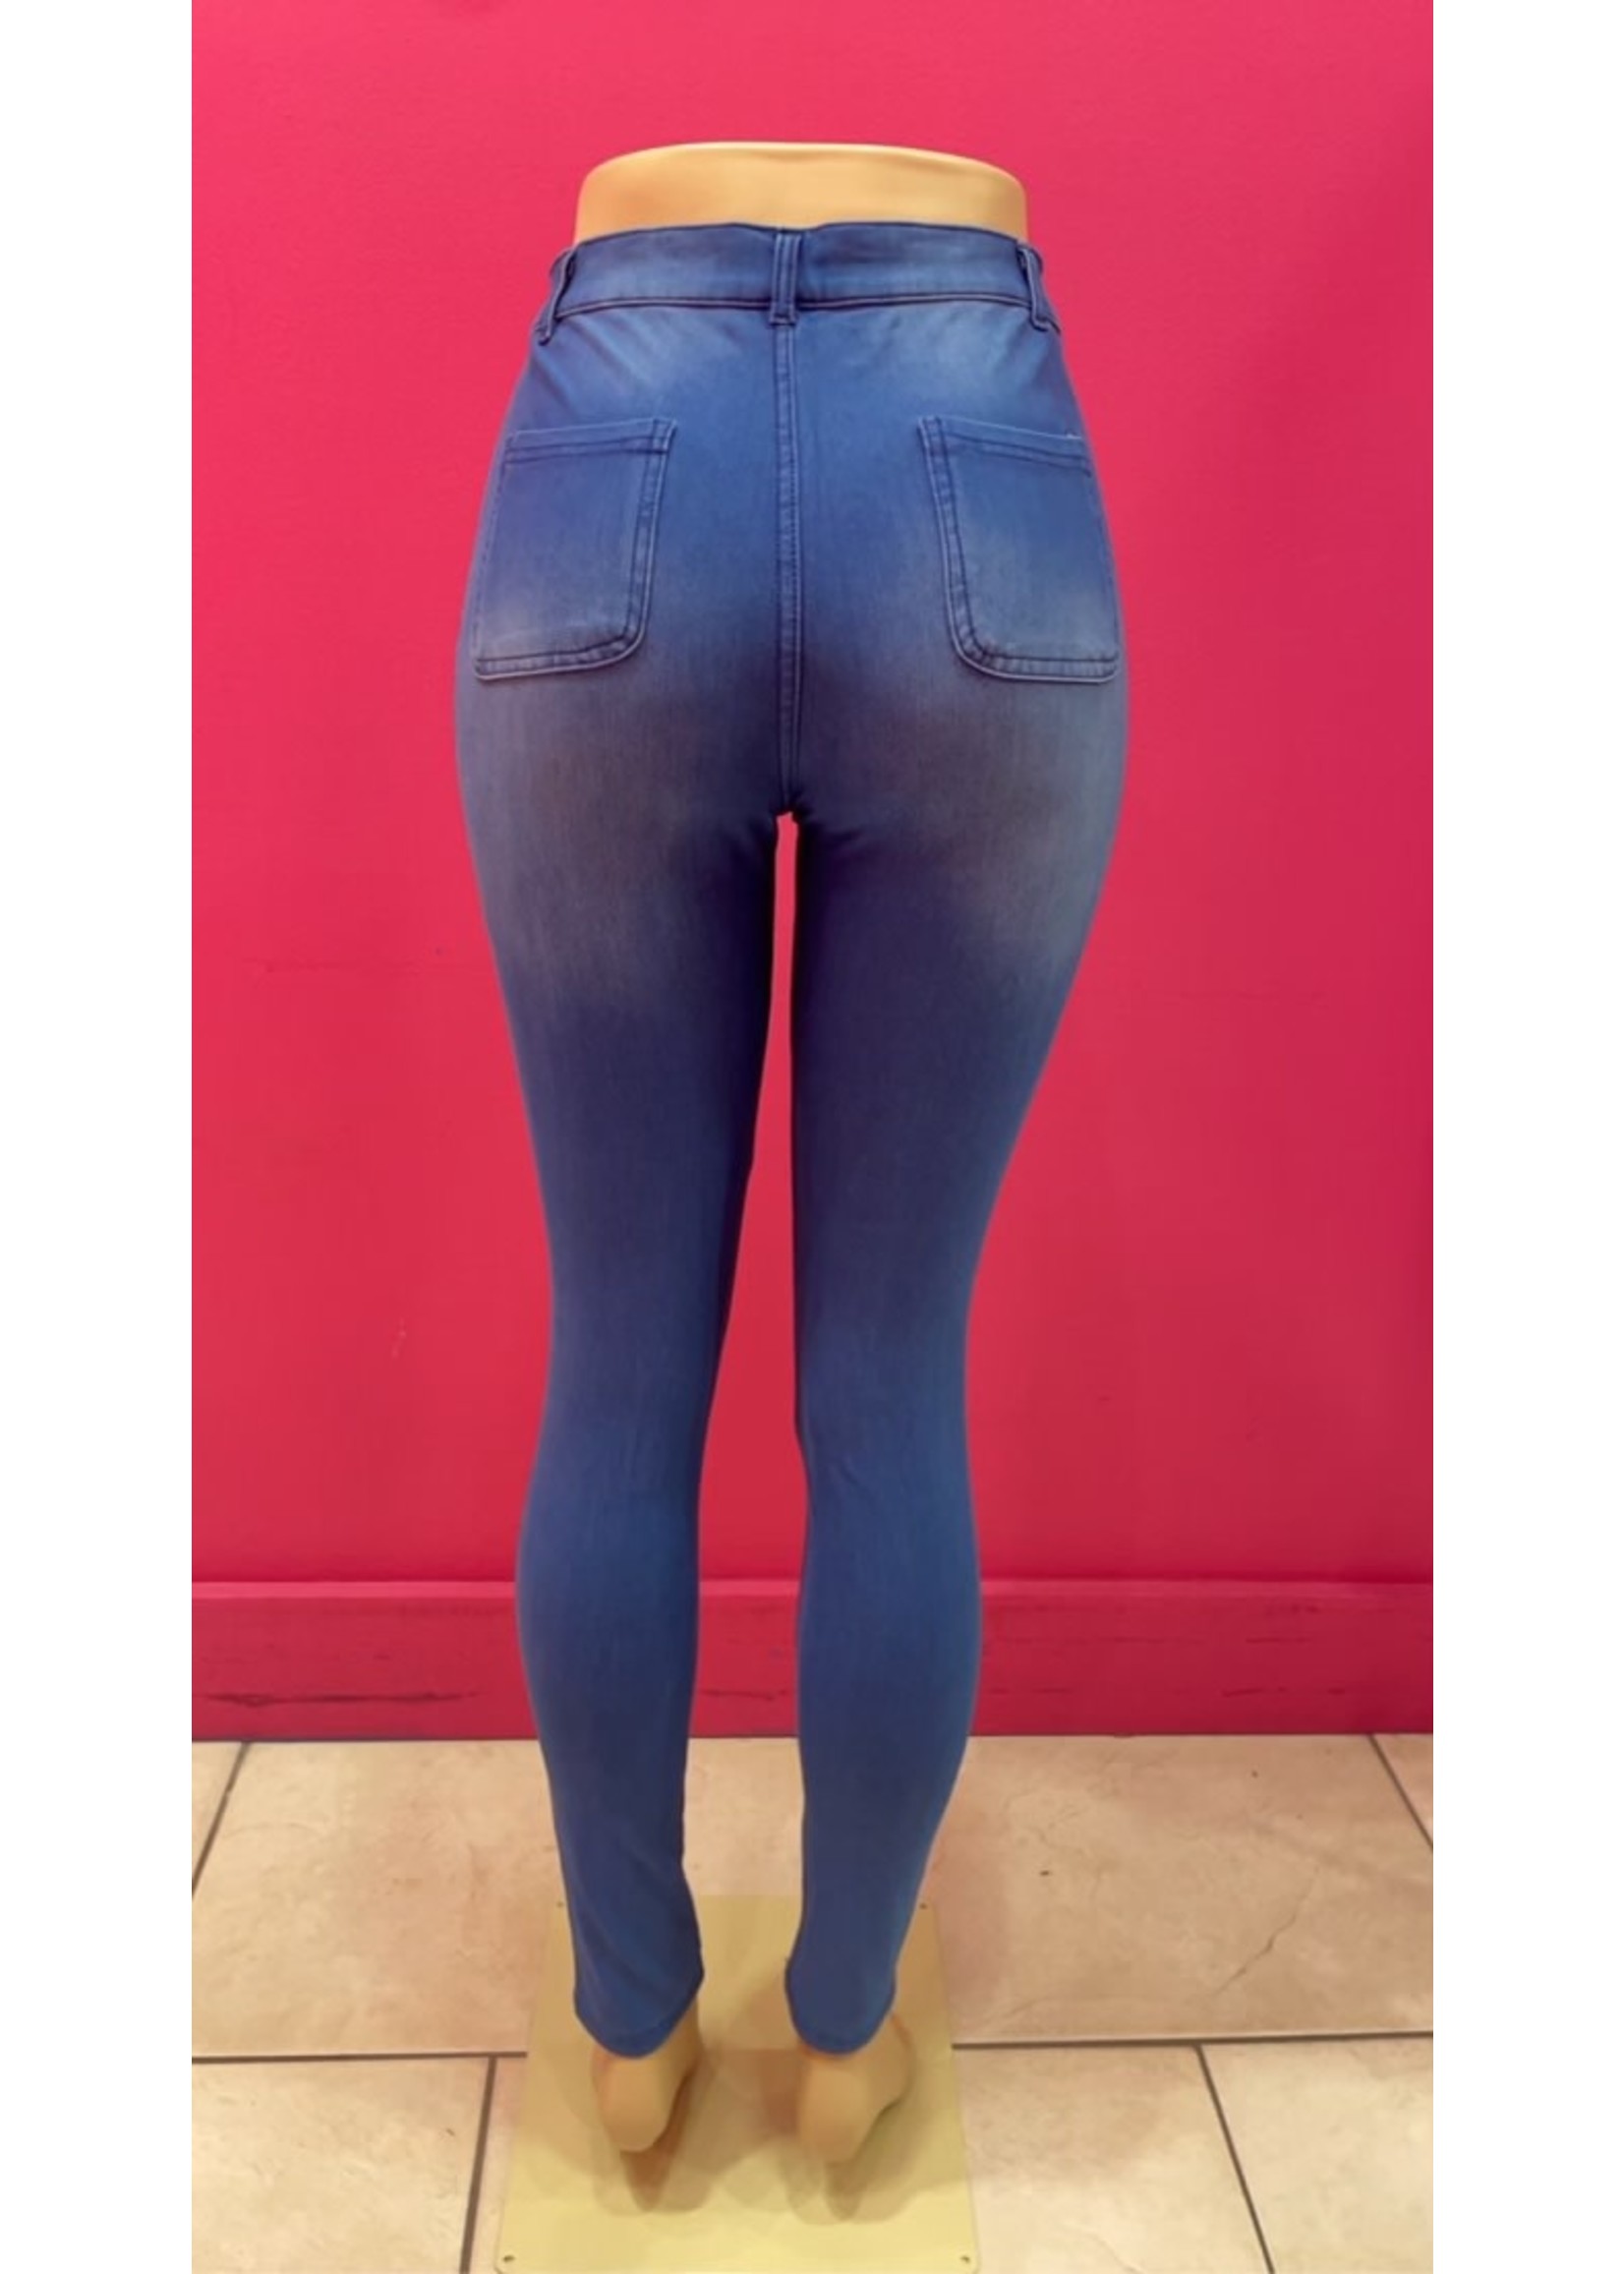 Buy NJs Women Blue Skinny fit Jeans Online at Low Prices in India   Paytmmallcom